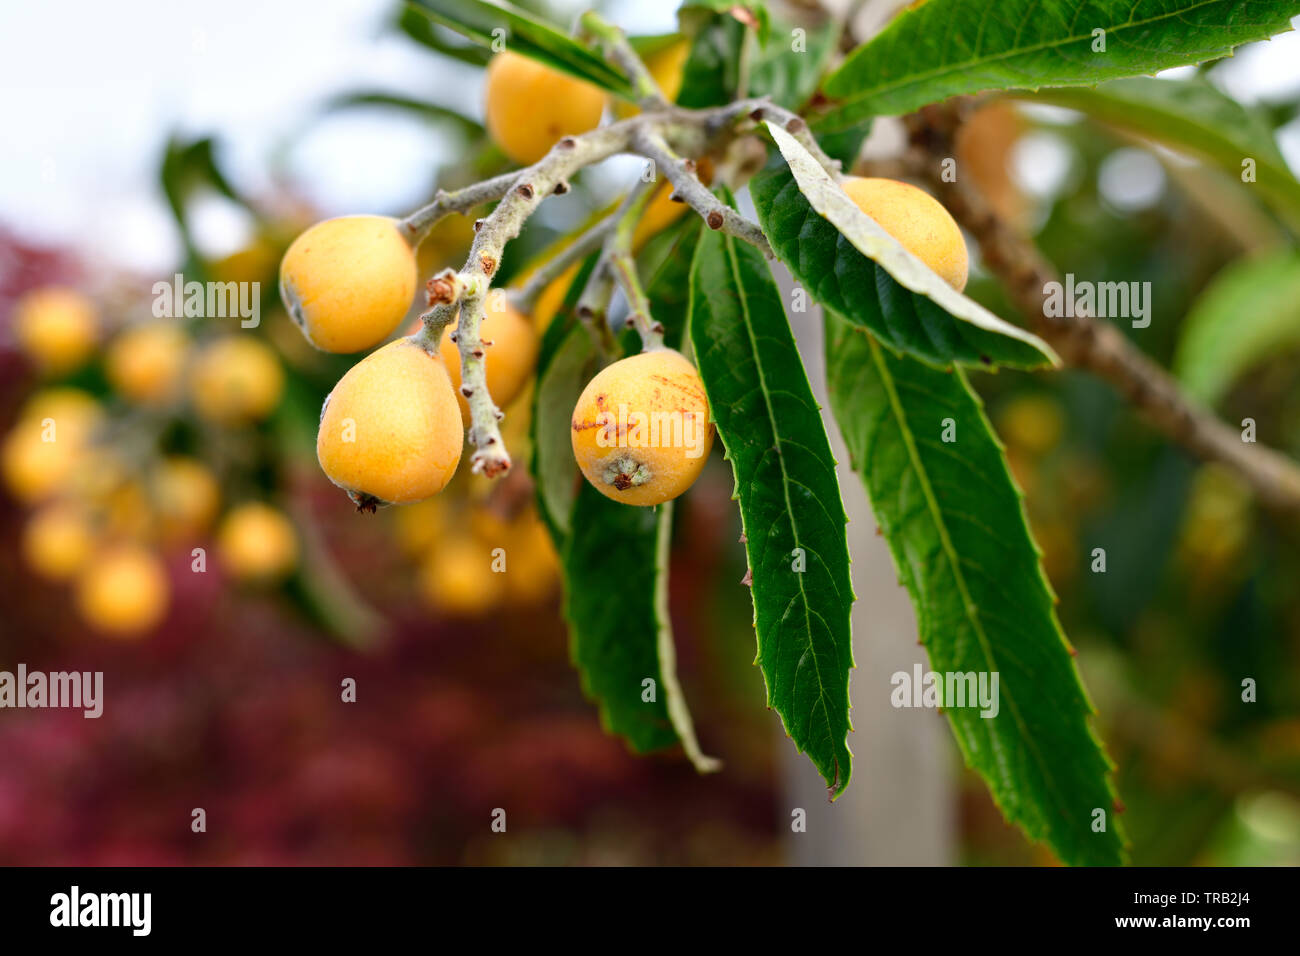 Loquat fruits on the branch Stock Photo